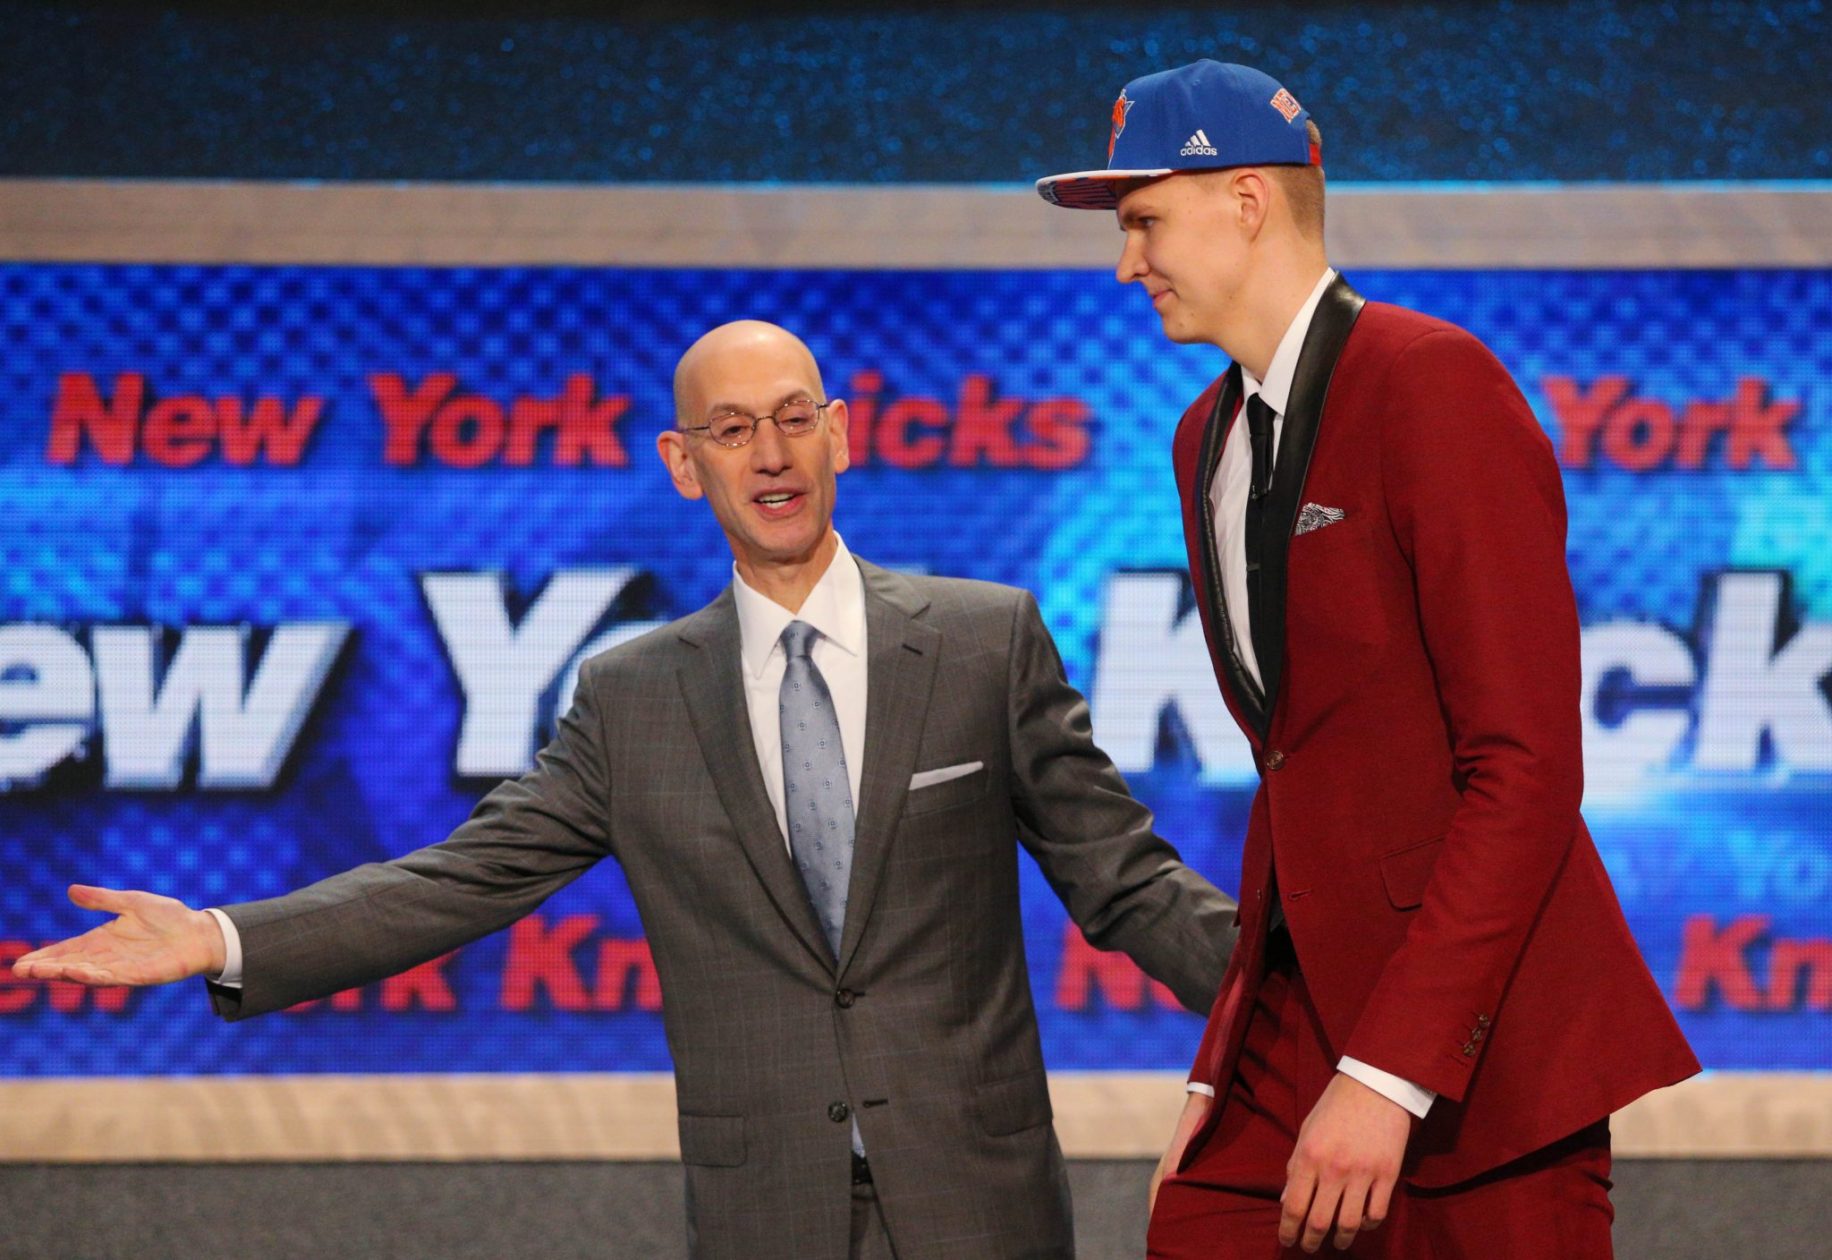 Why the New York Knicks should focus on drafting players 2